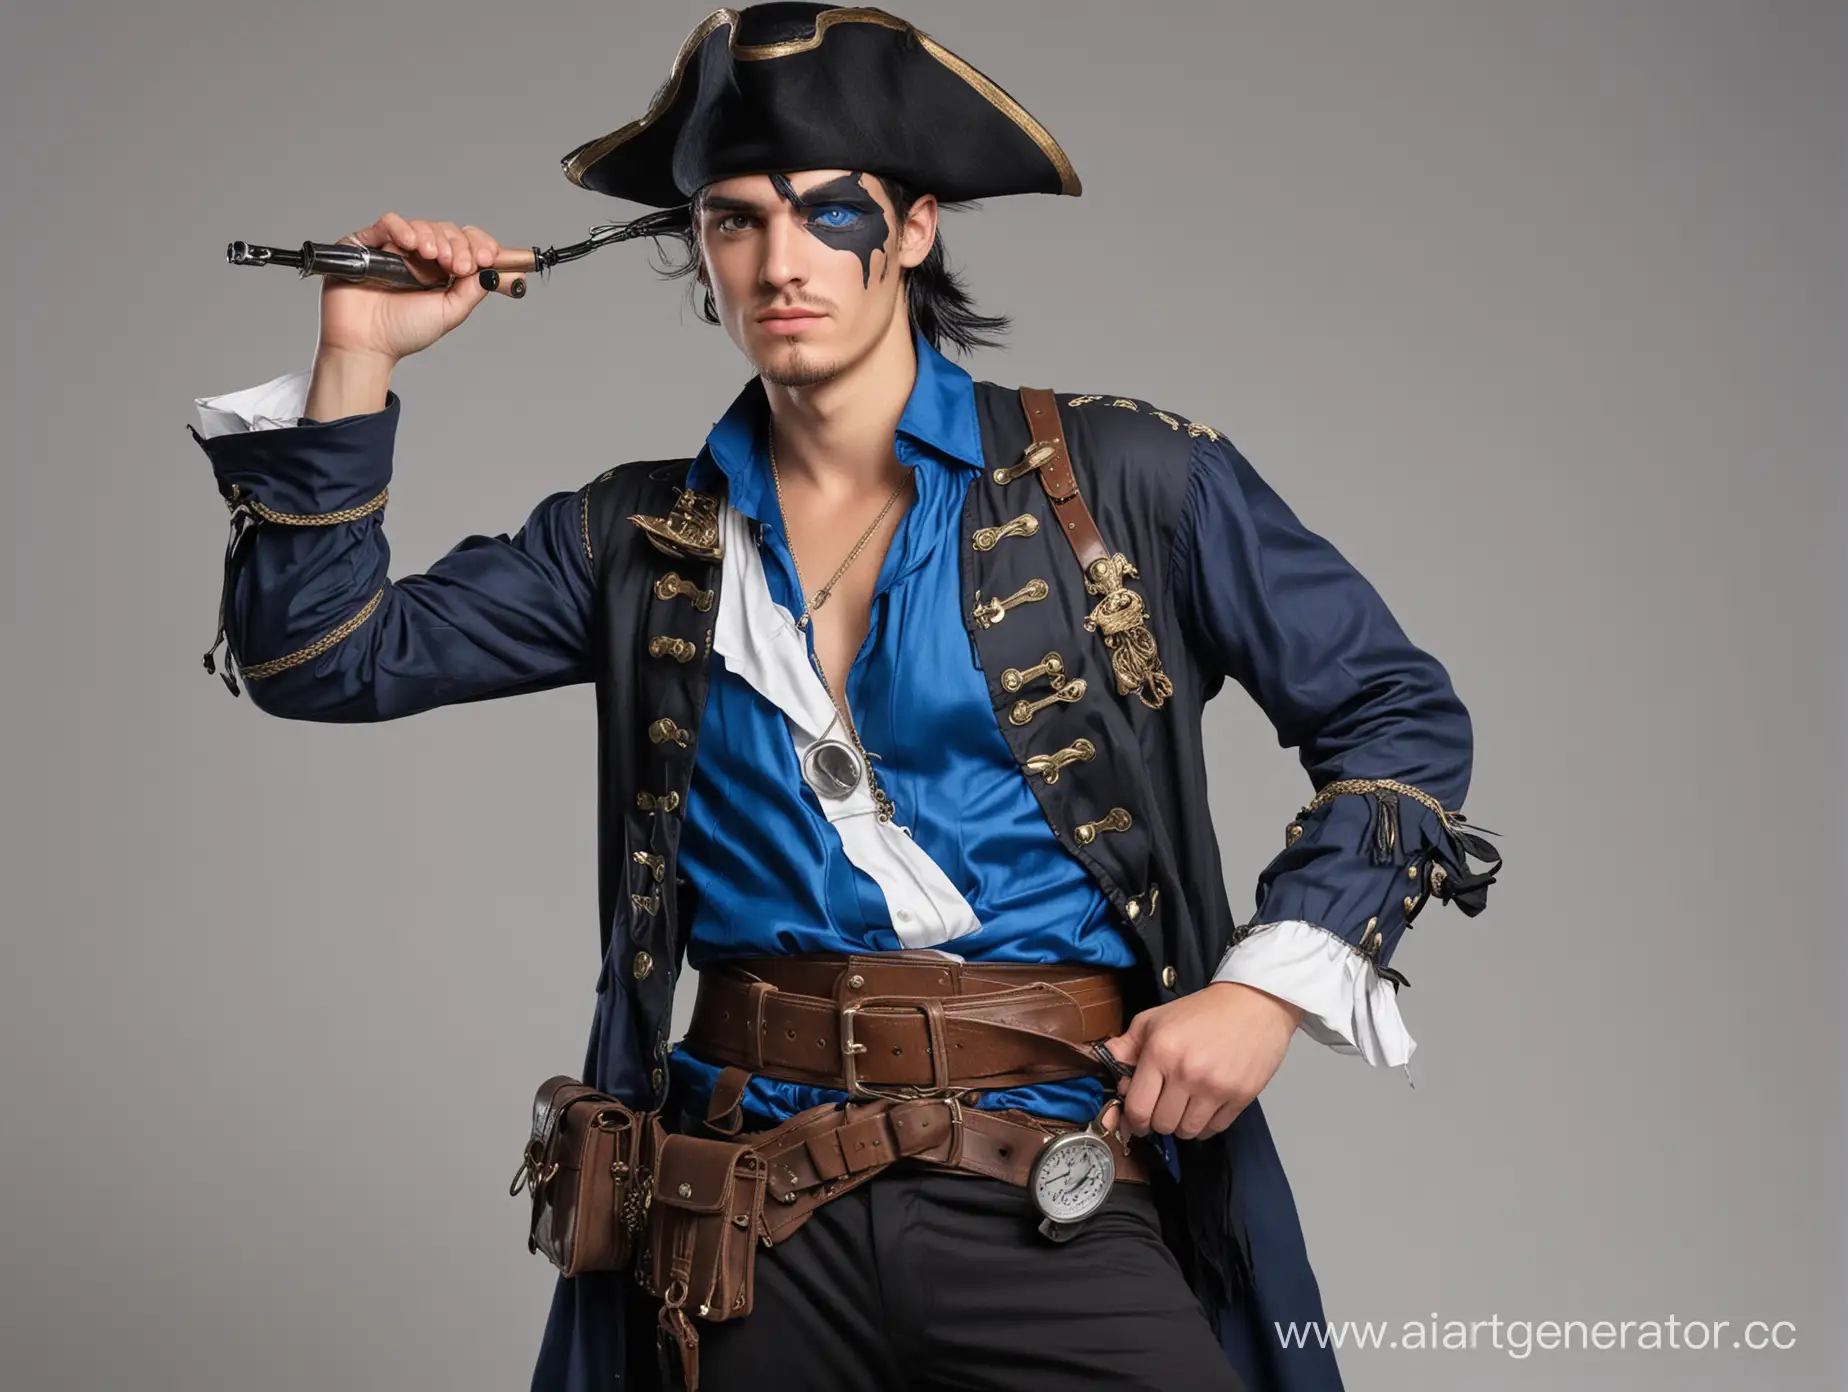 Young-Pirate-in-Black-and-Blue-Outfit-with-Medical-Instruments